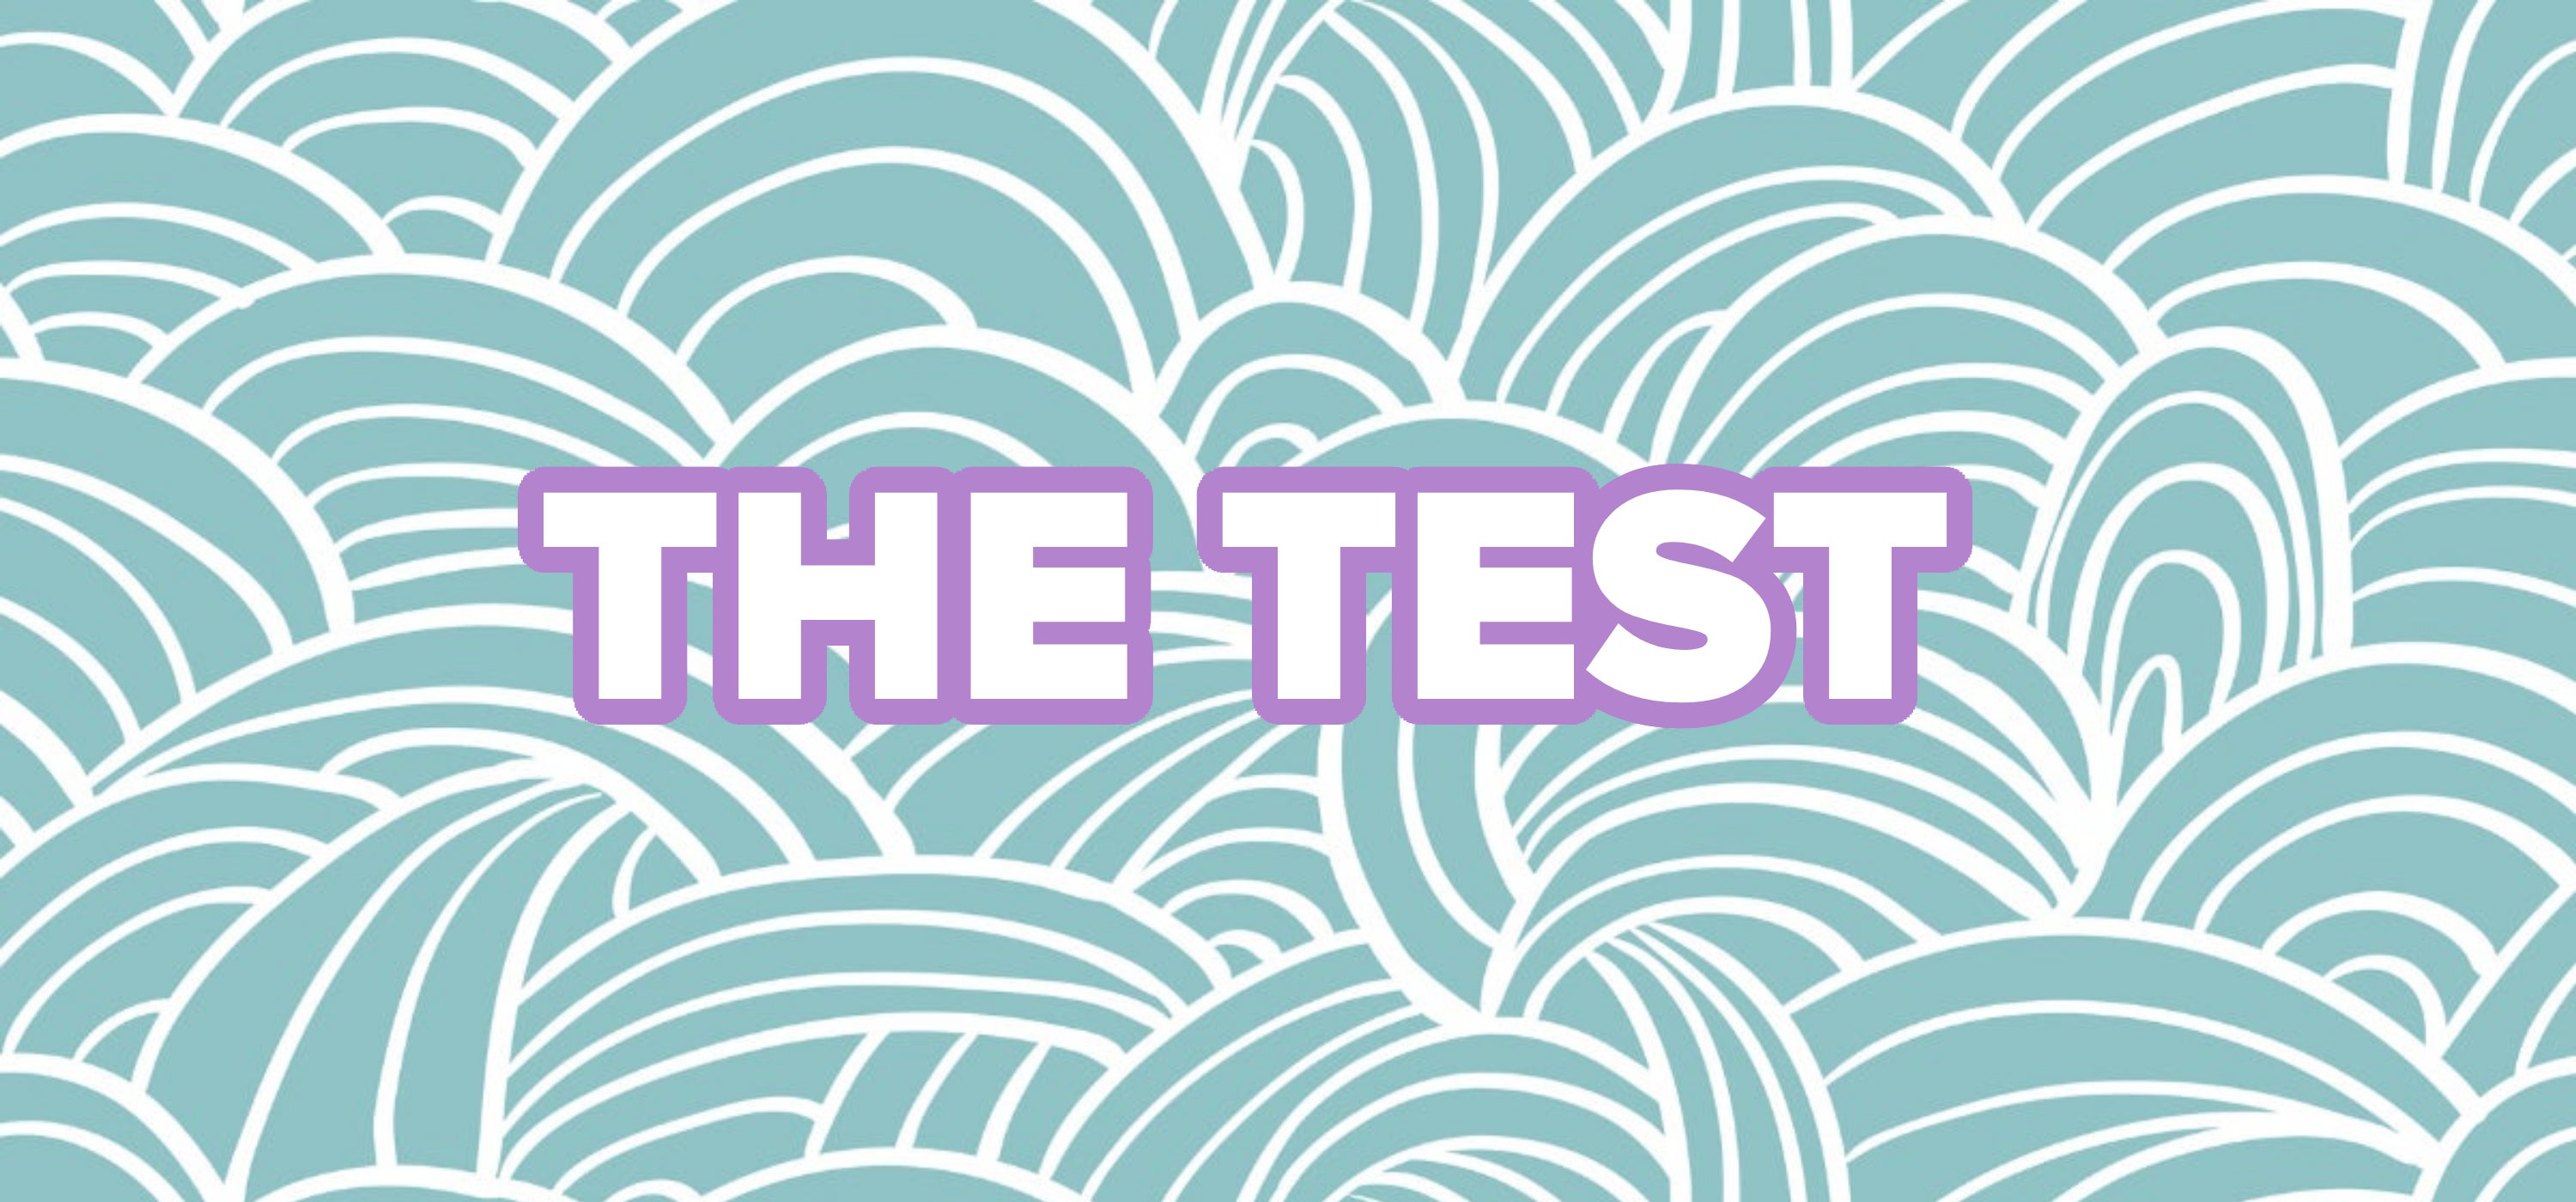 Text: &quot;THE TEST&quot; over a decorative background